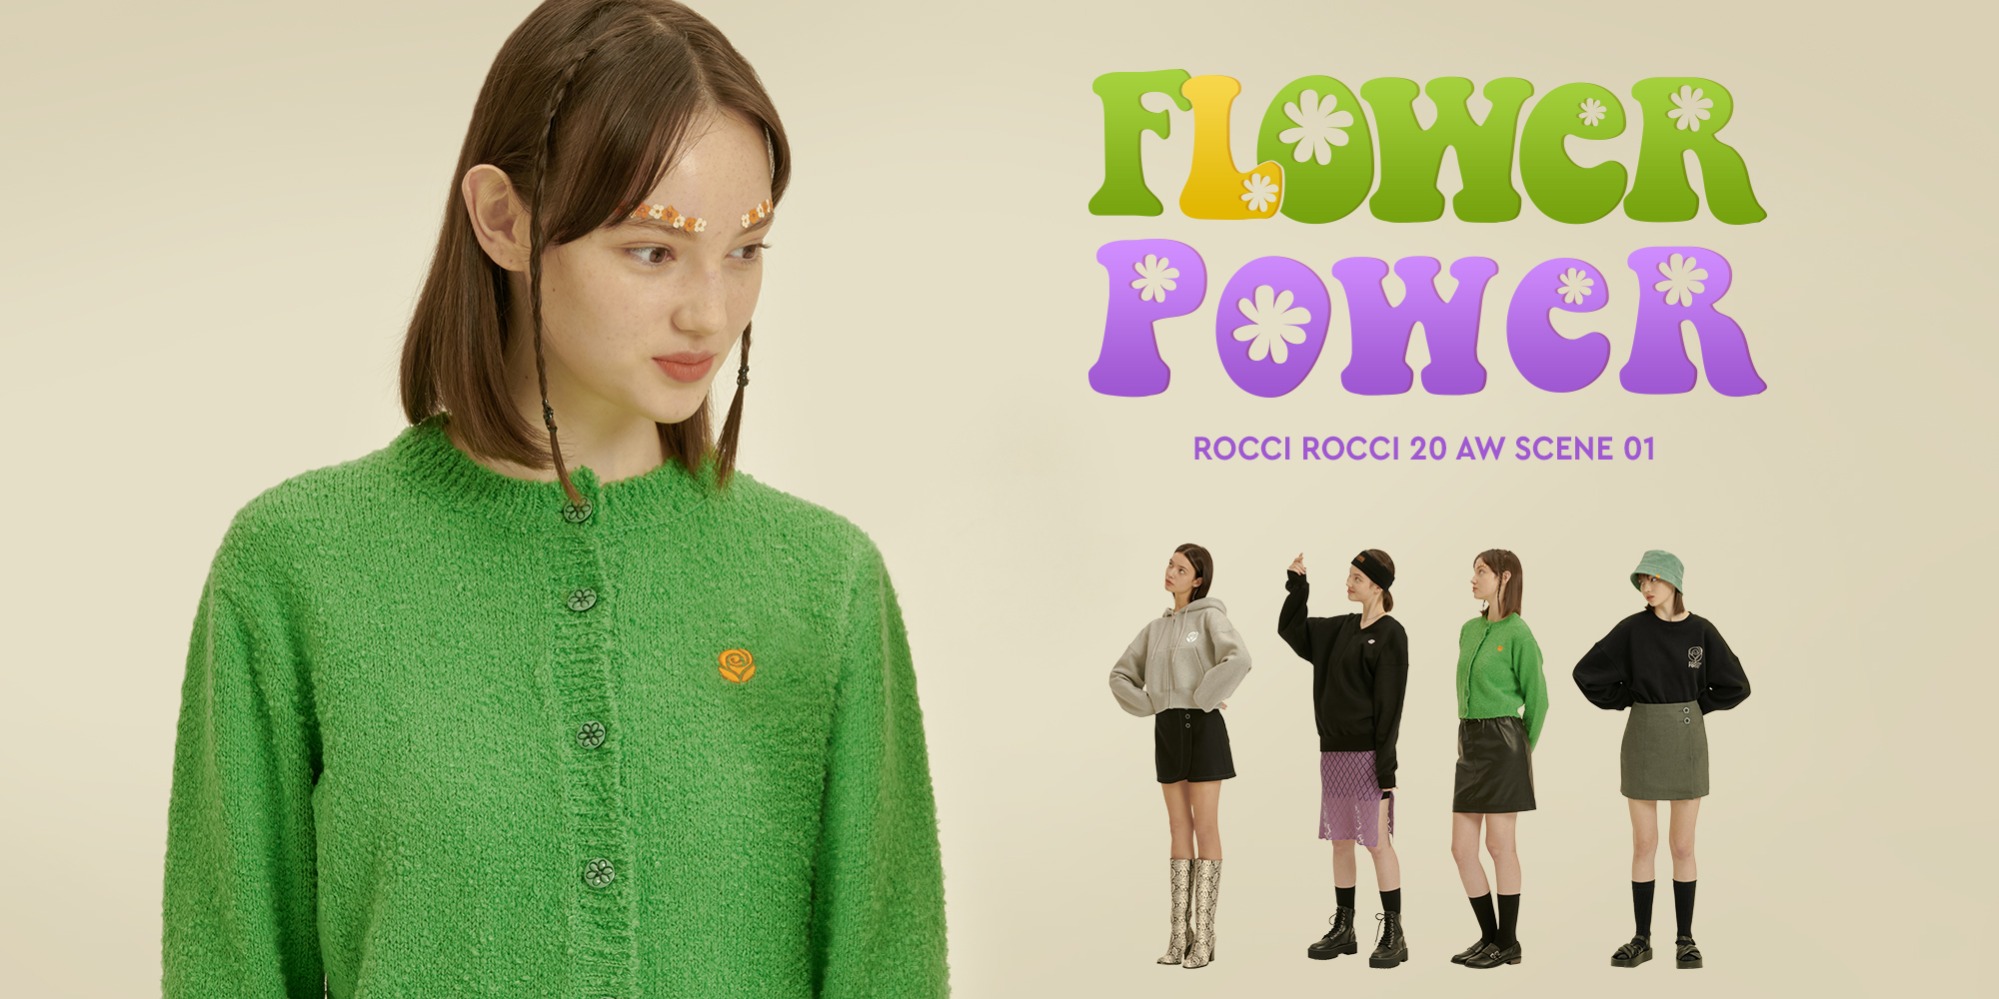 20 AW COLLECTION. FLOWER POWER #SCENE 0120 AW COLLECTION. FLOWER POWER #SCENE 01자체브랜드